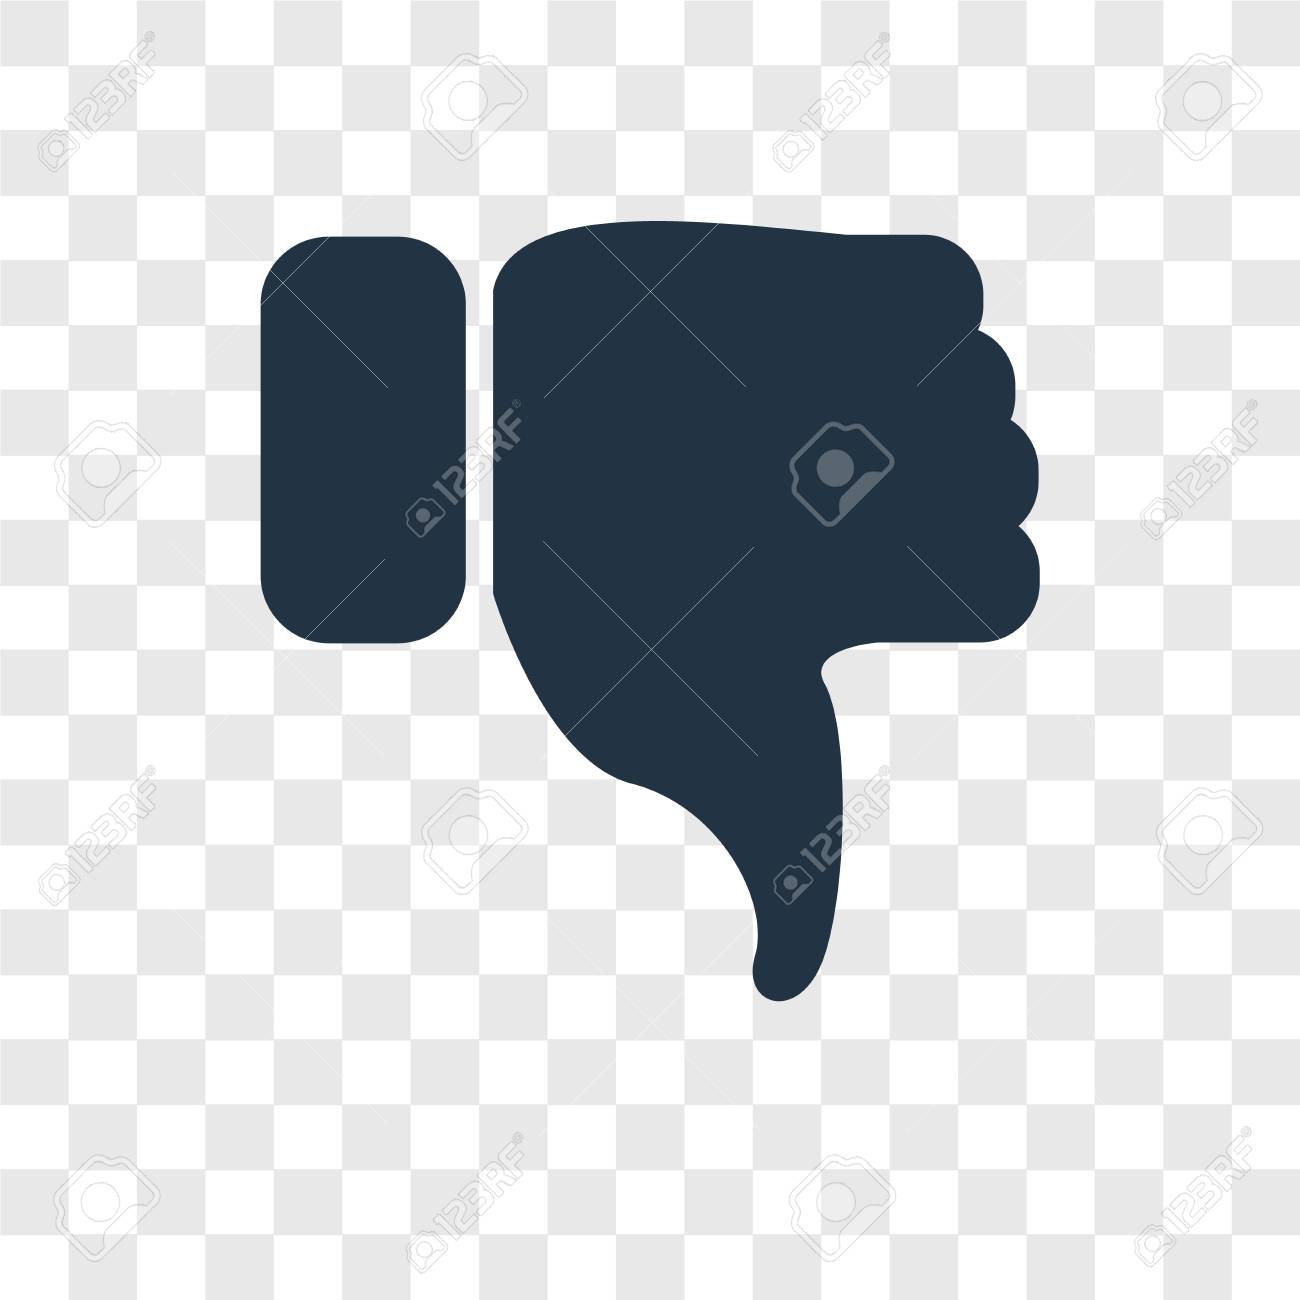 Dislike Vector Icon Isolated On Transparent Background